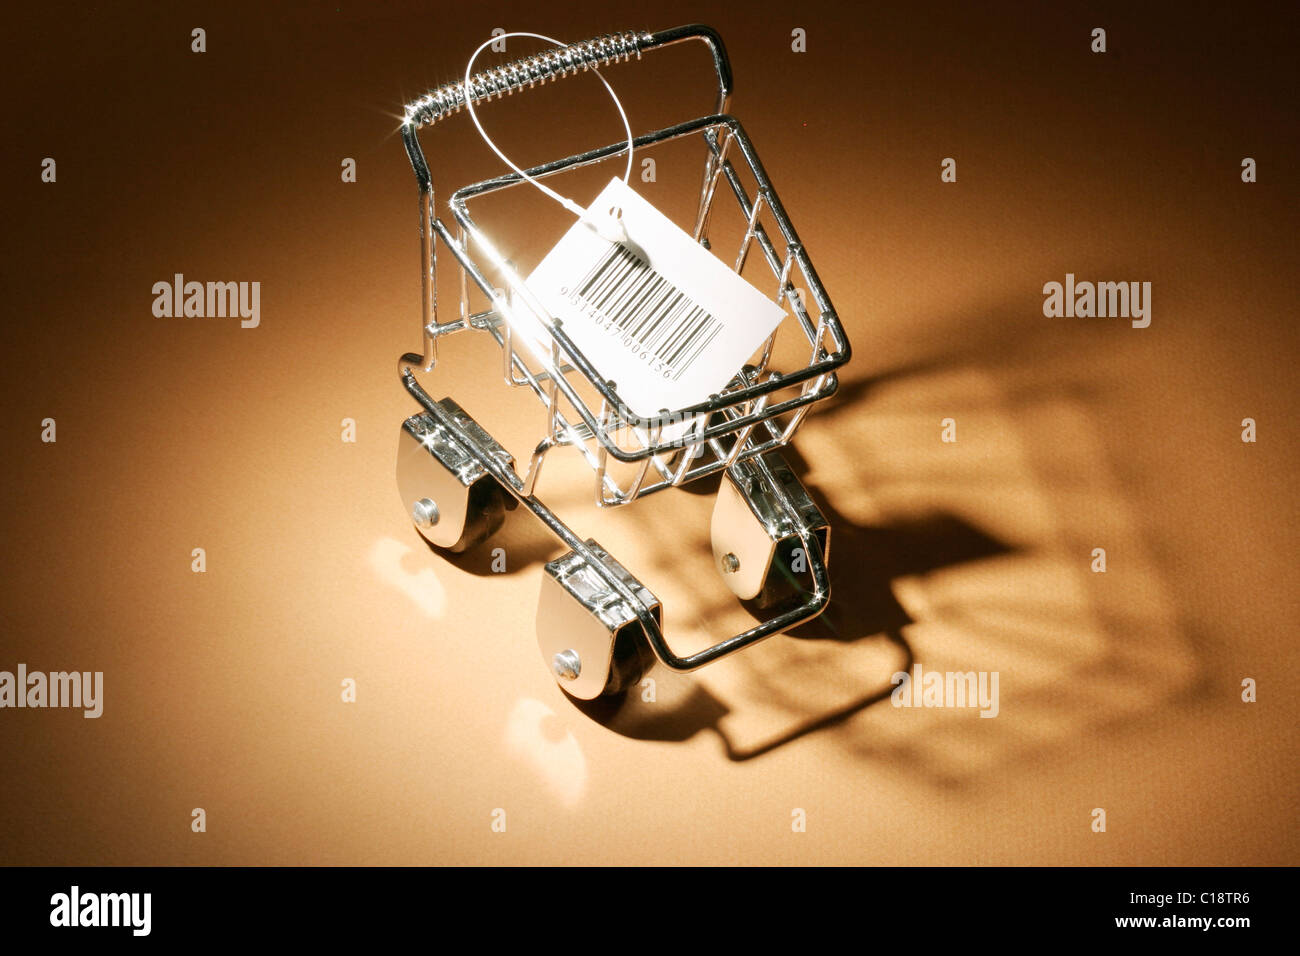 Shopping trolley and tag Stock Photo